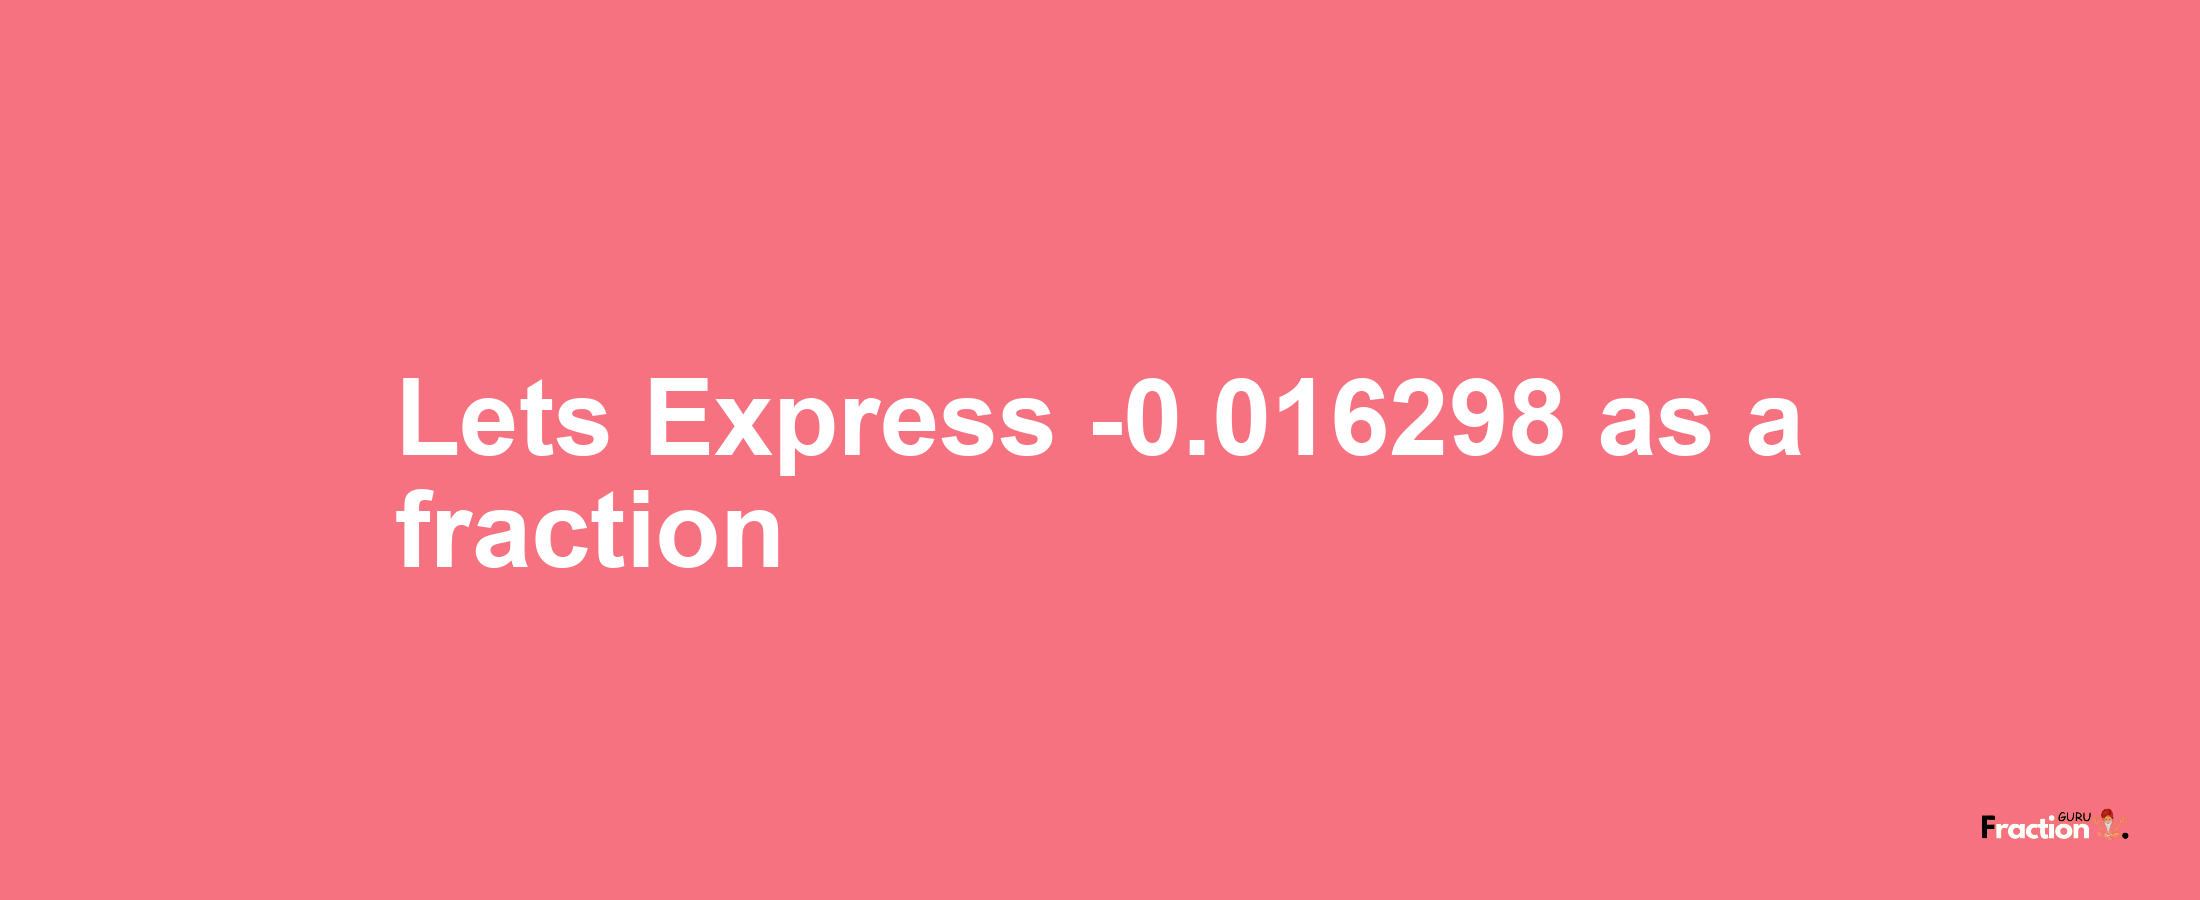 Lets Express -0.016298 as afraction